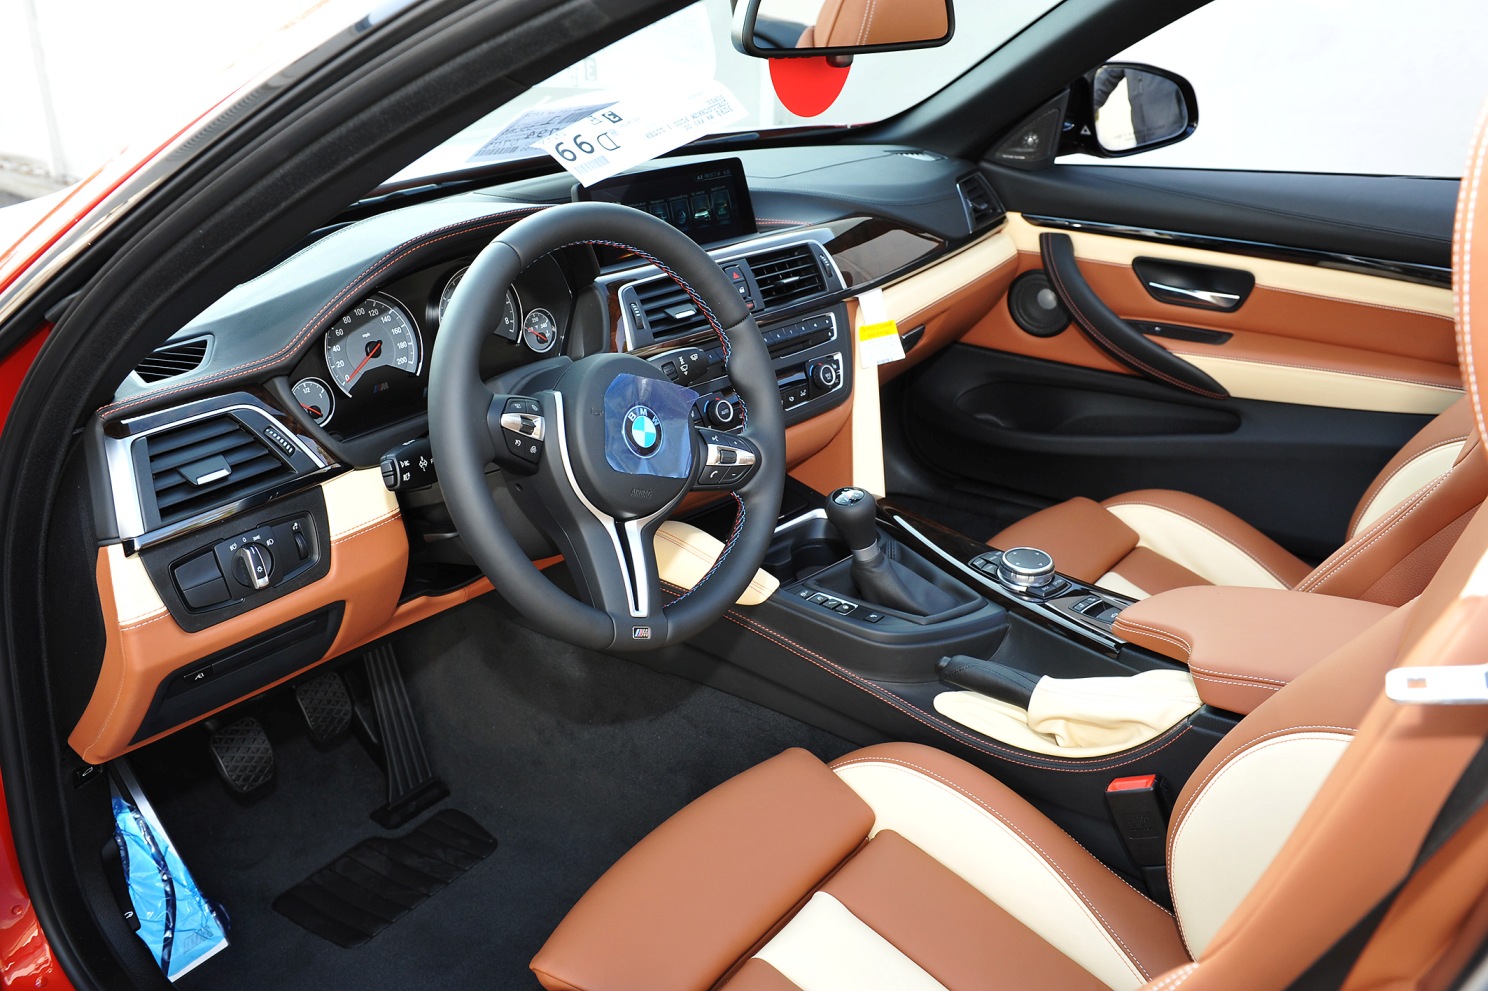 Compliment Inhale Wrong Photos] Bespoke 2017 BMW M4 Individual Interior - BMW.SG | BMW Singapore  Owners Community